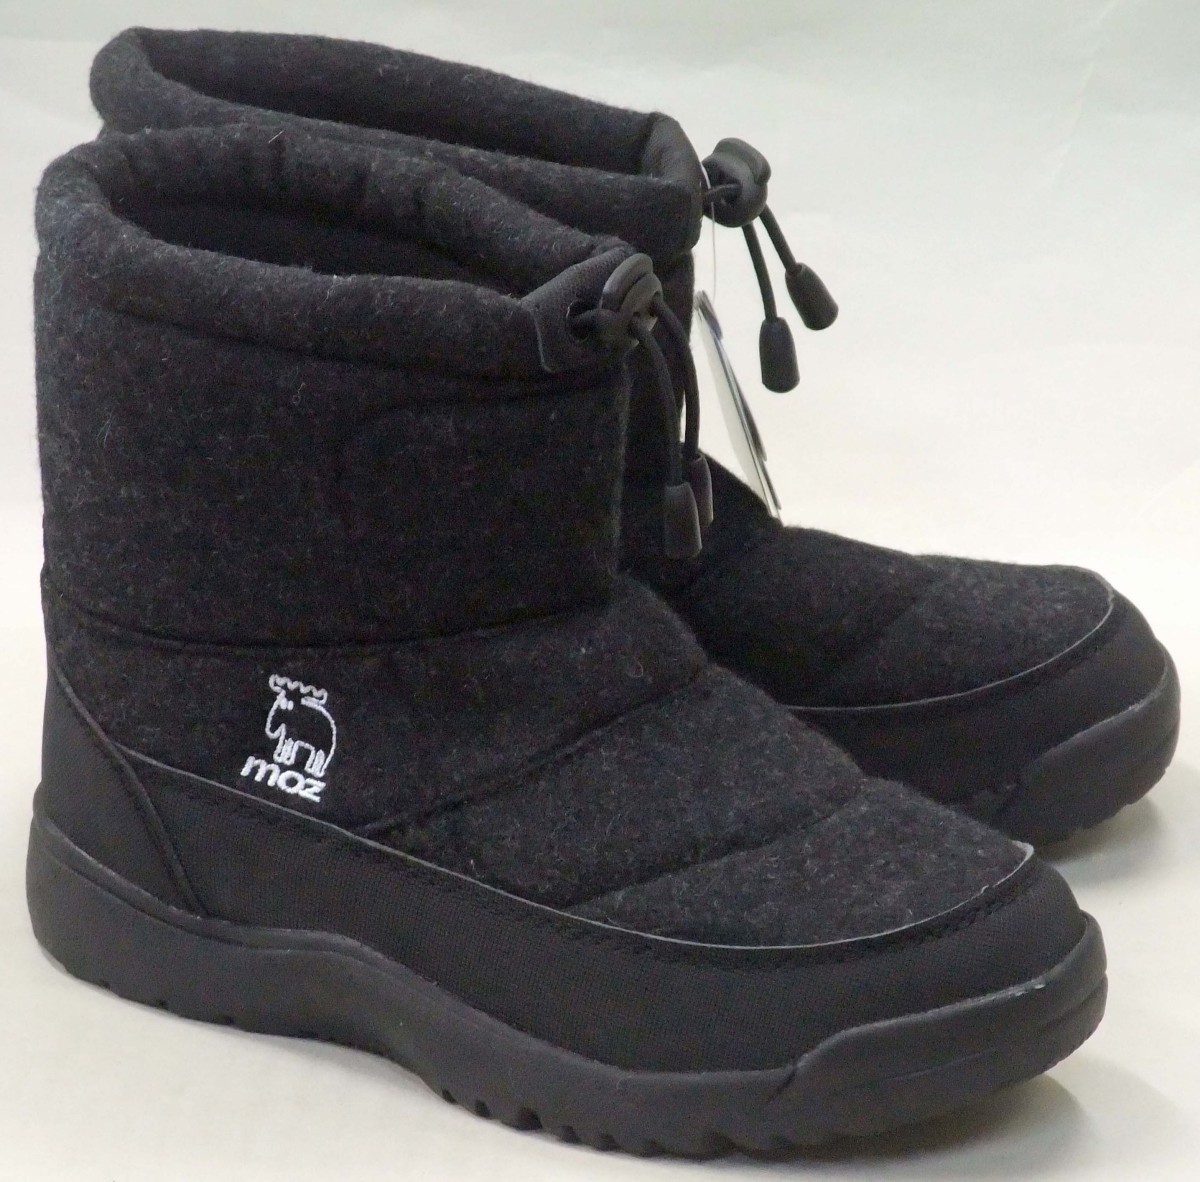 MOZmozMZ-458 waterproof protection against cold winter short boots black / gray lady's . slide snow casual boots felt style snow country specification elk Sweden 